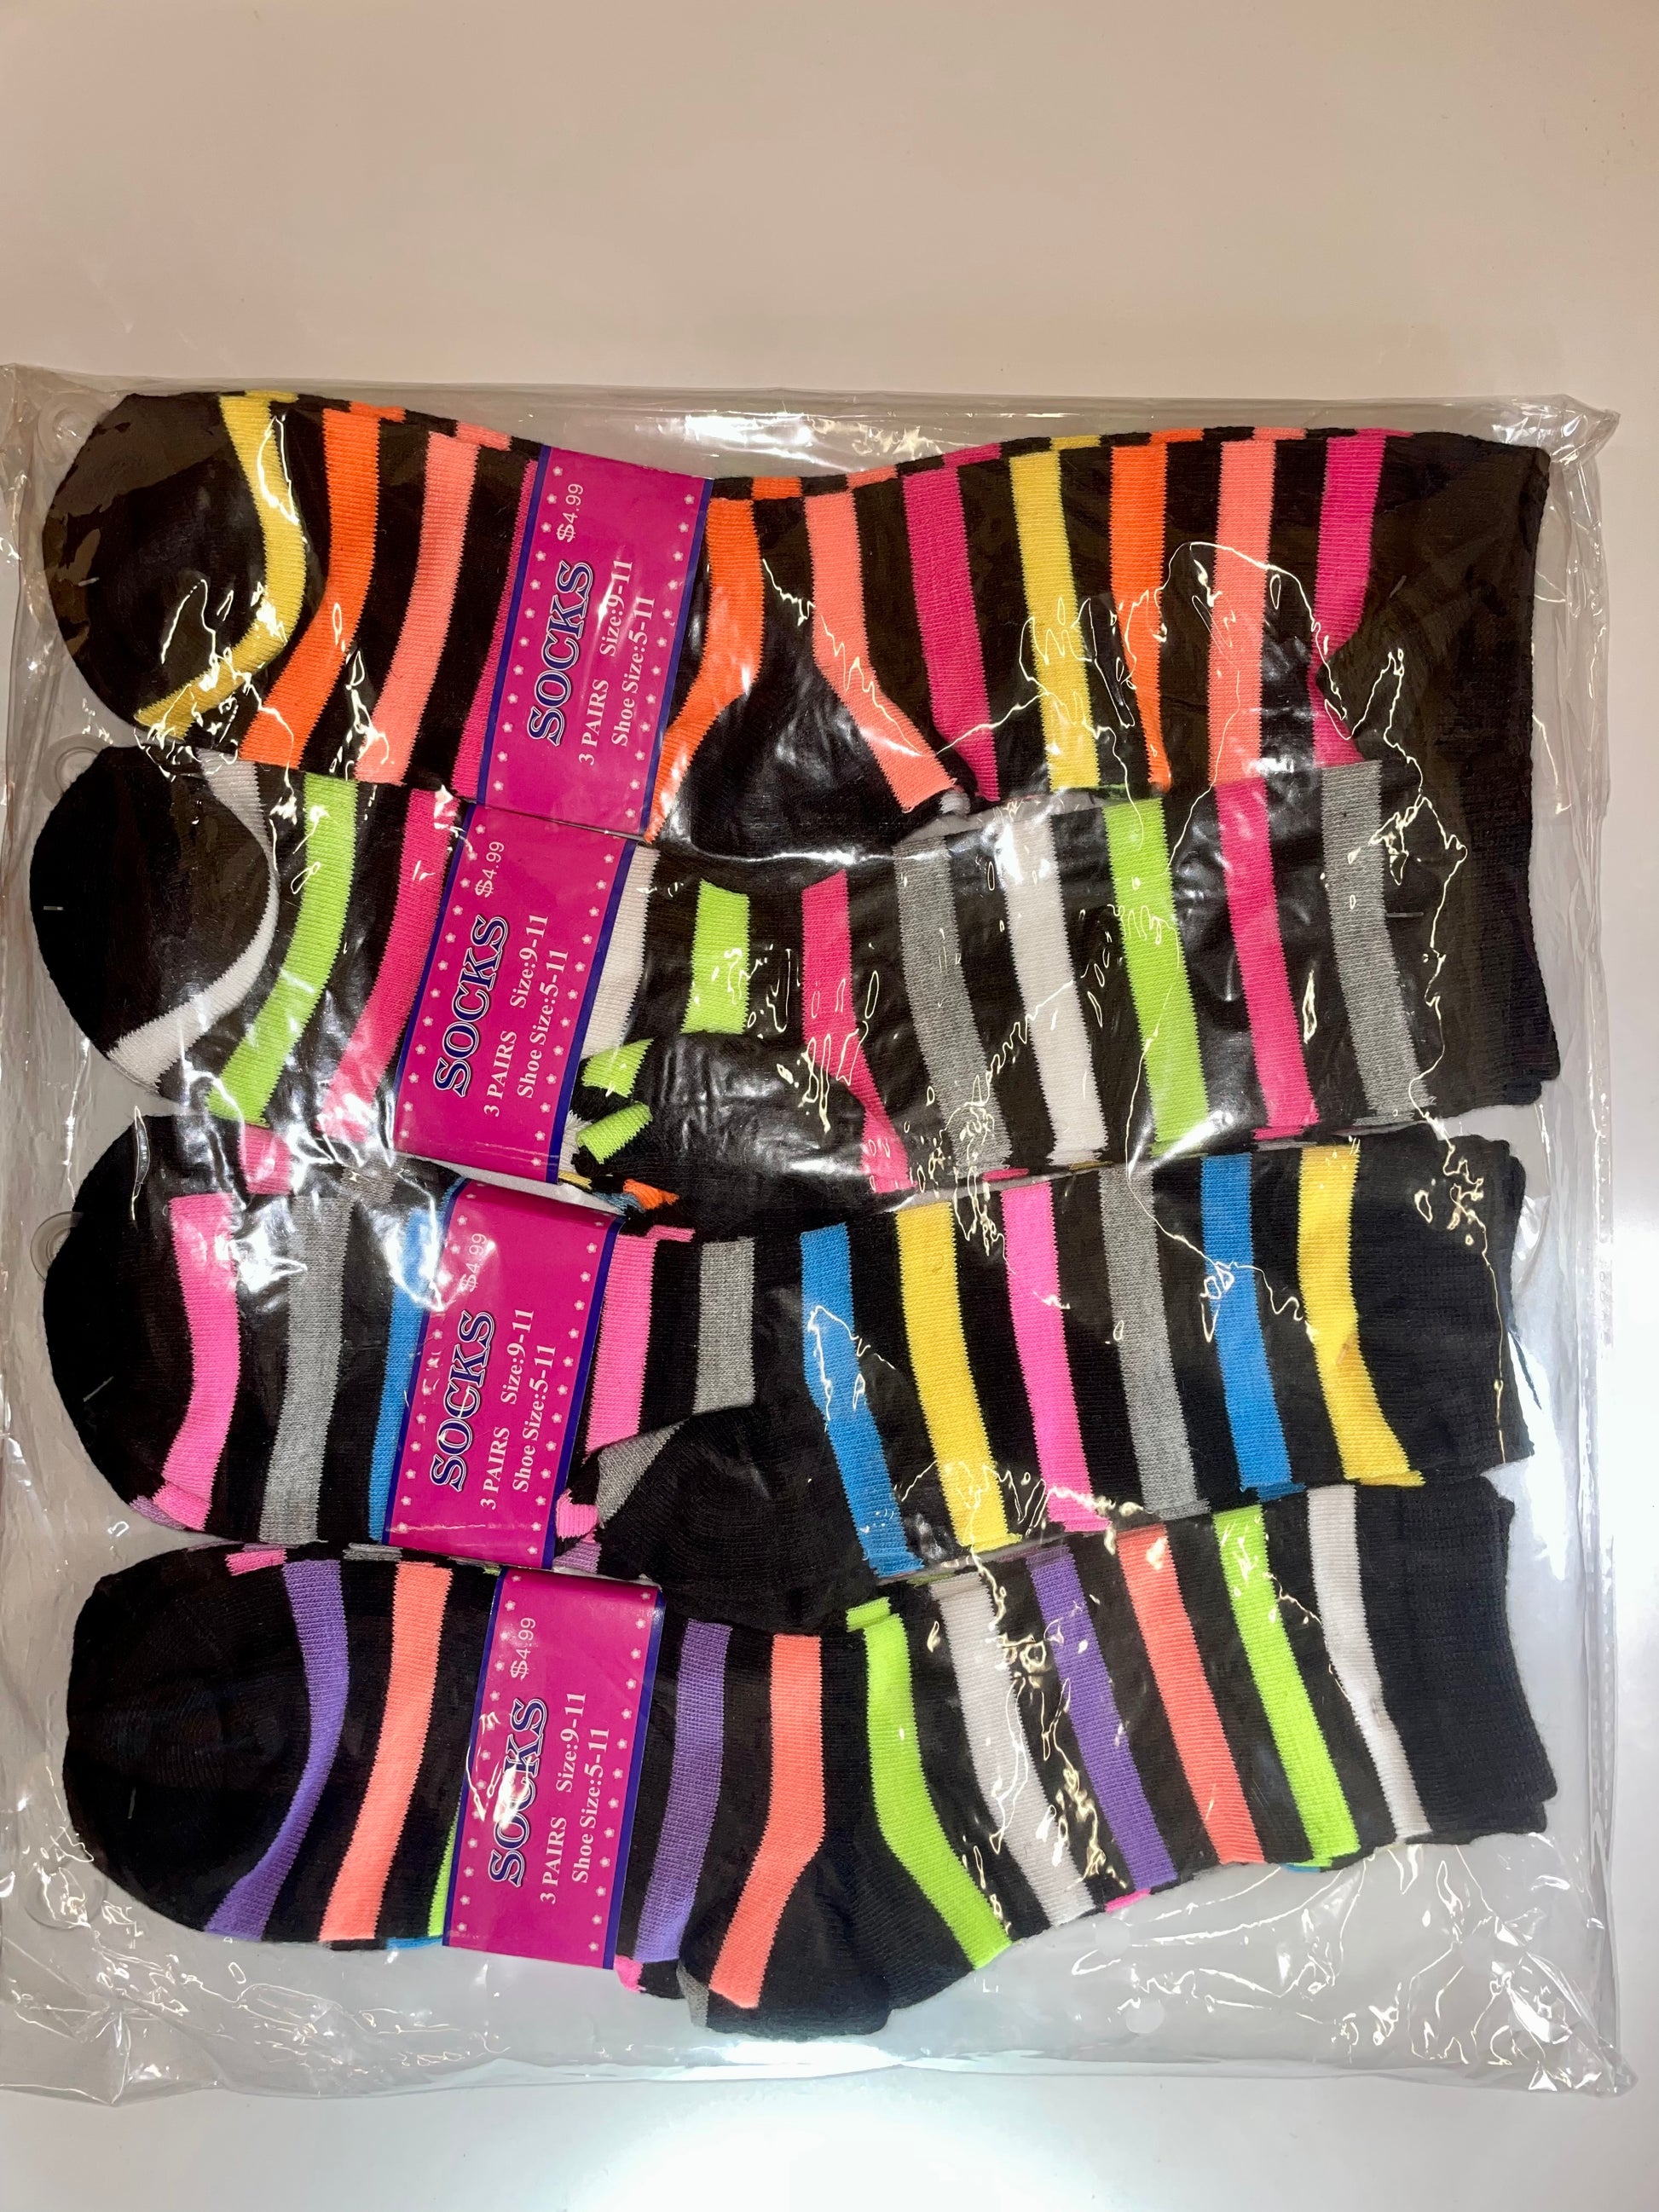 "Women's crew socks with a striped pattern and a moisture-wicking design"